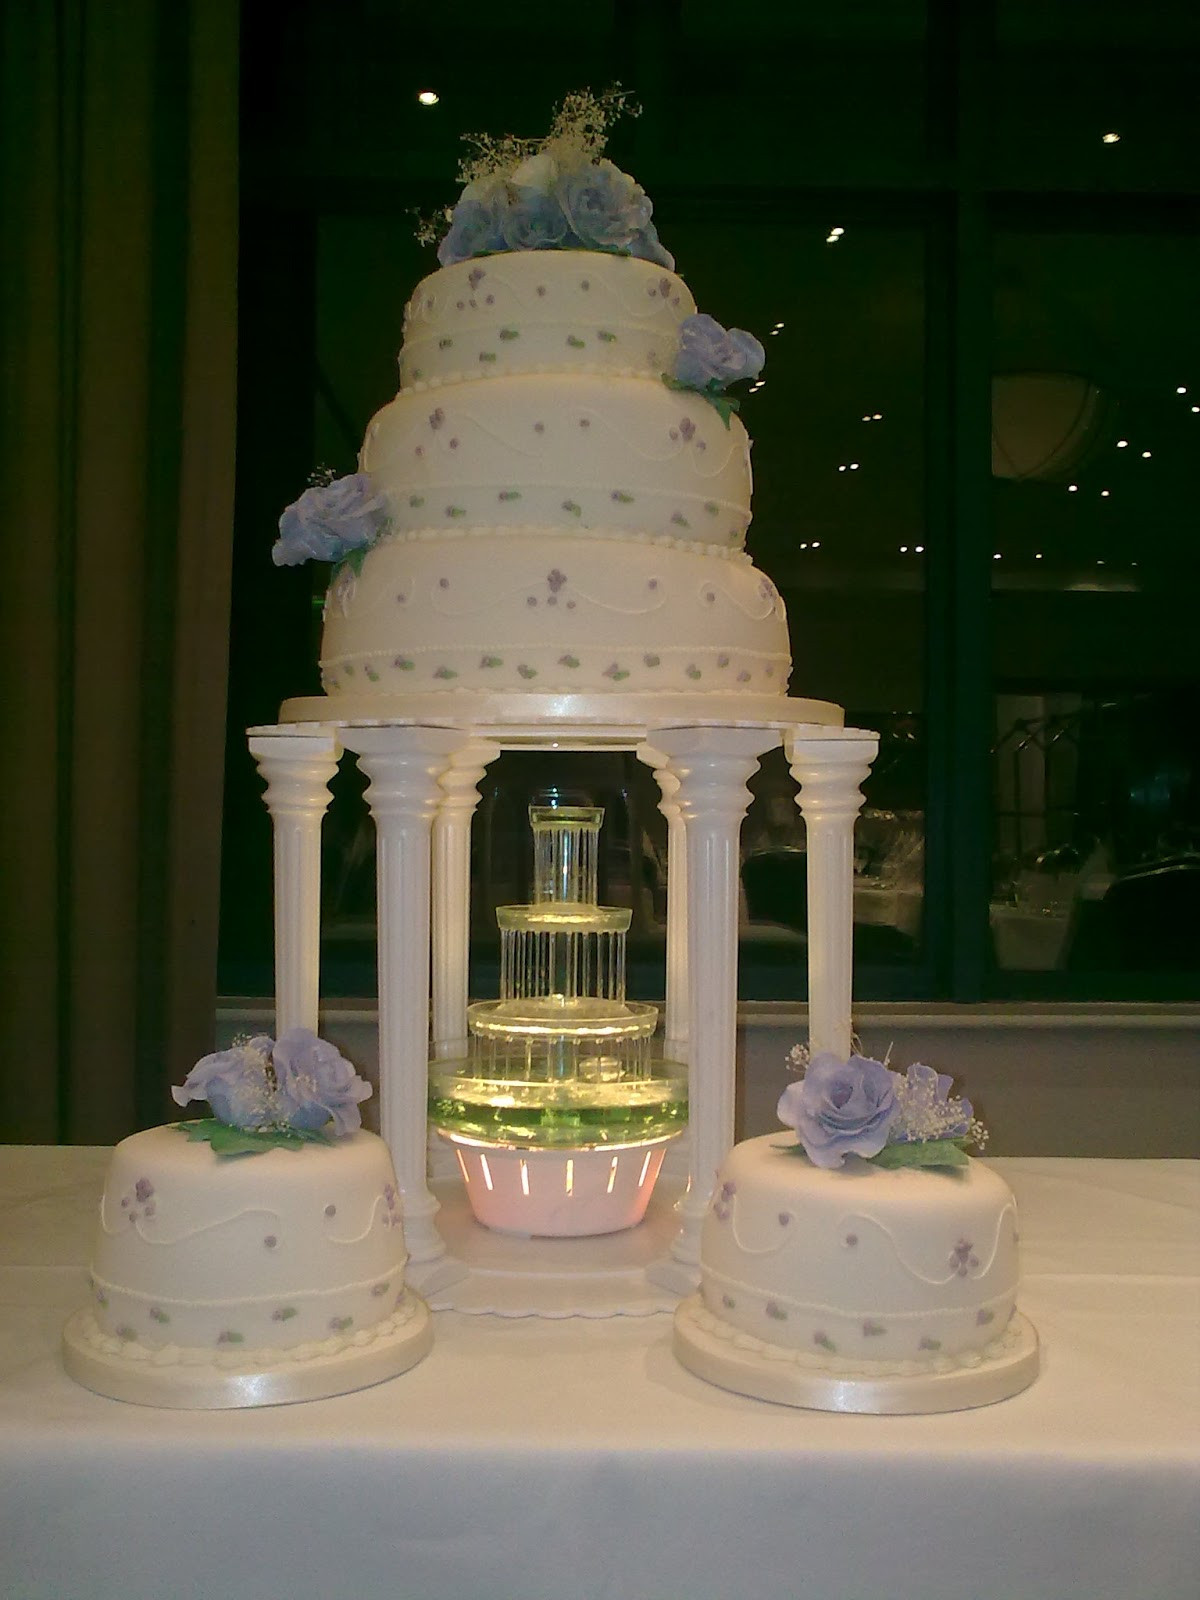 Wedding Cakes With Fountains
 Wedding Cakes With Fountains 2012